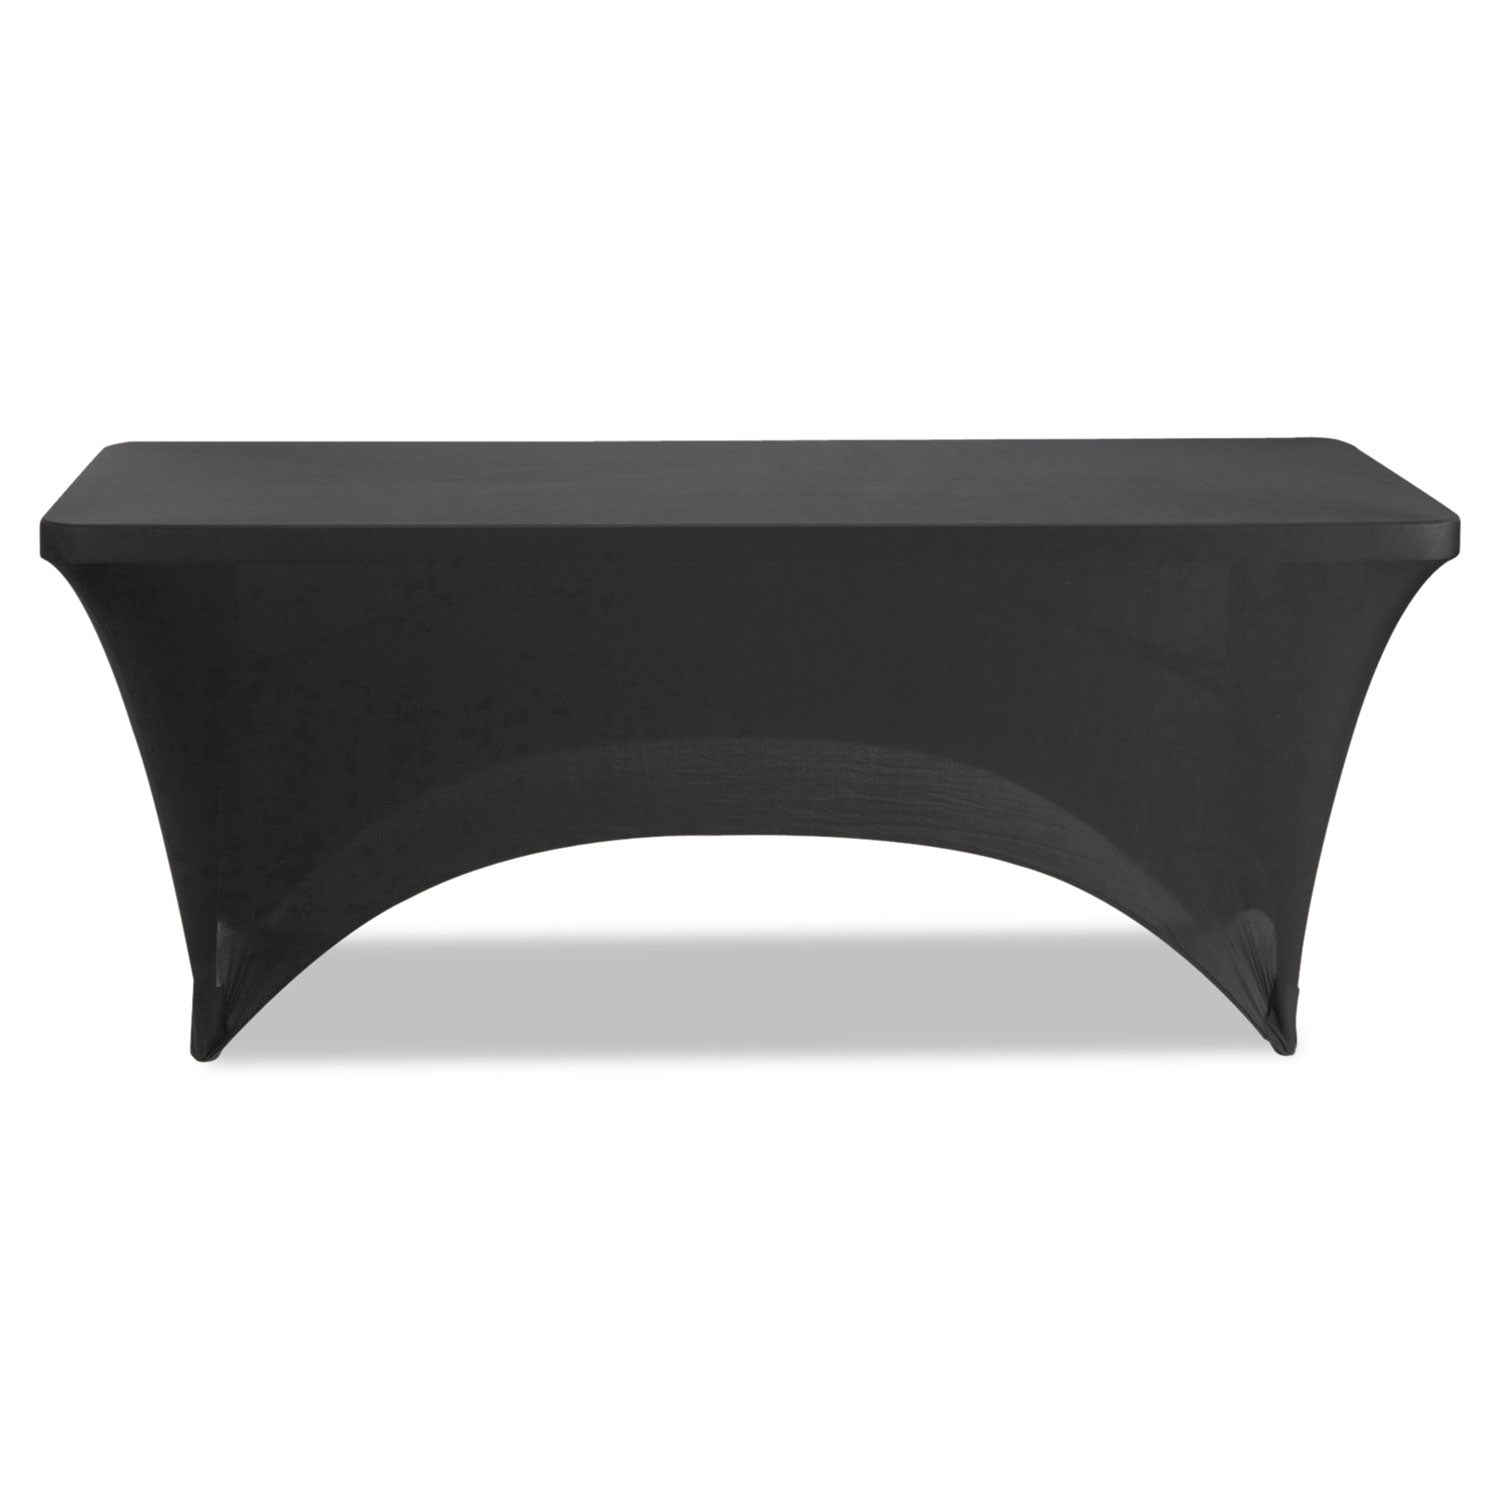 iGear Fabric Table Cover, Polyester/Spandex, 30" x 72", Black - 